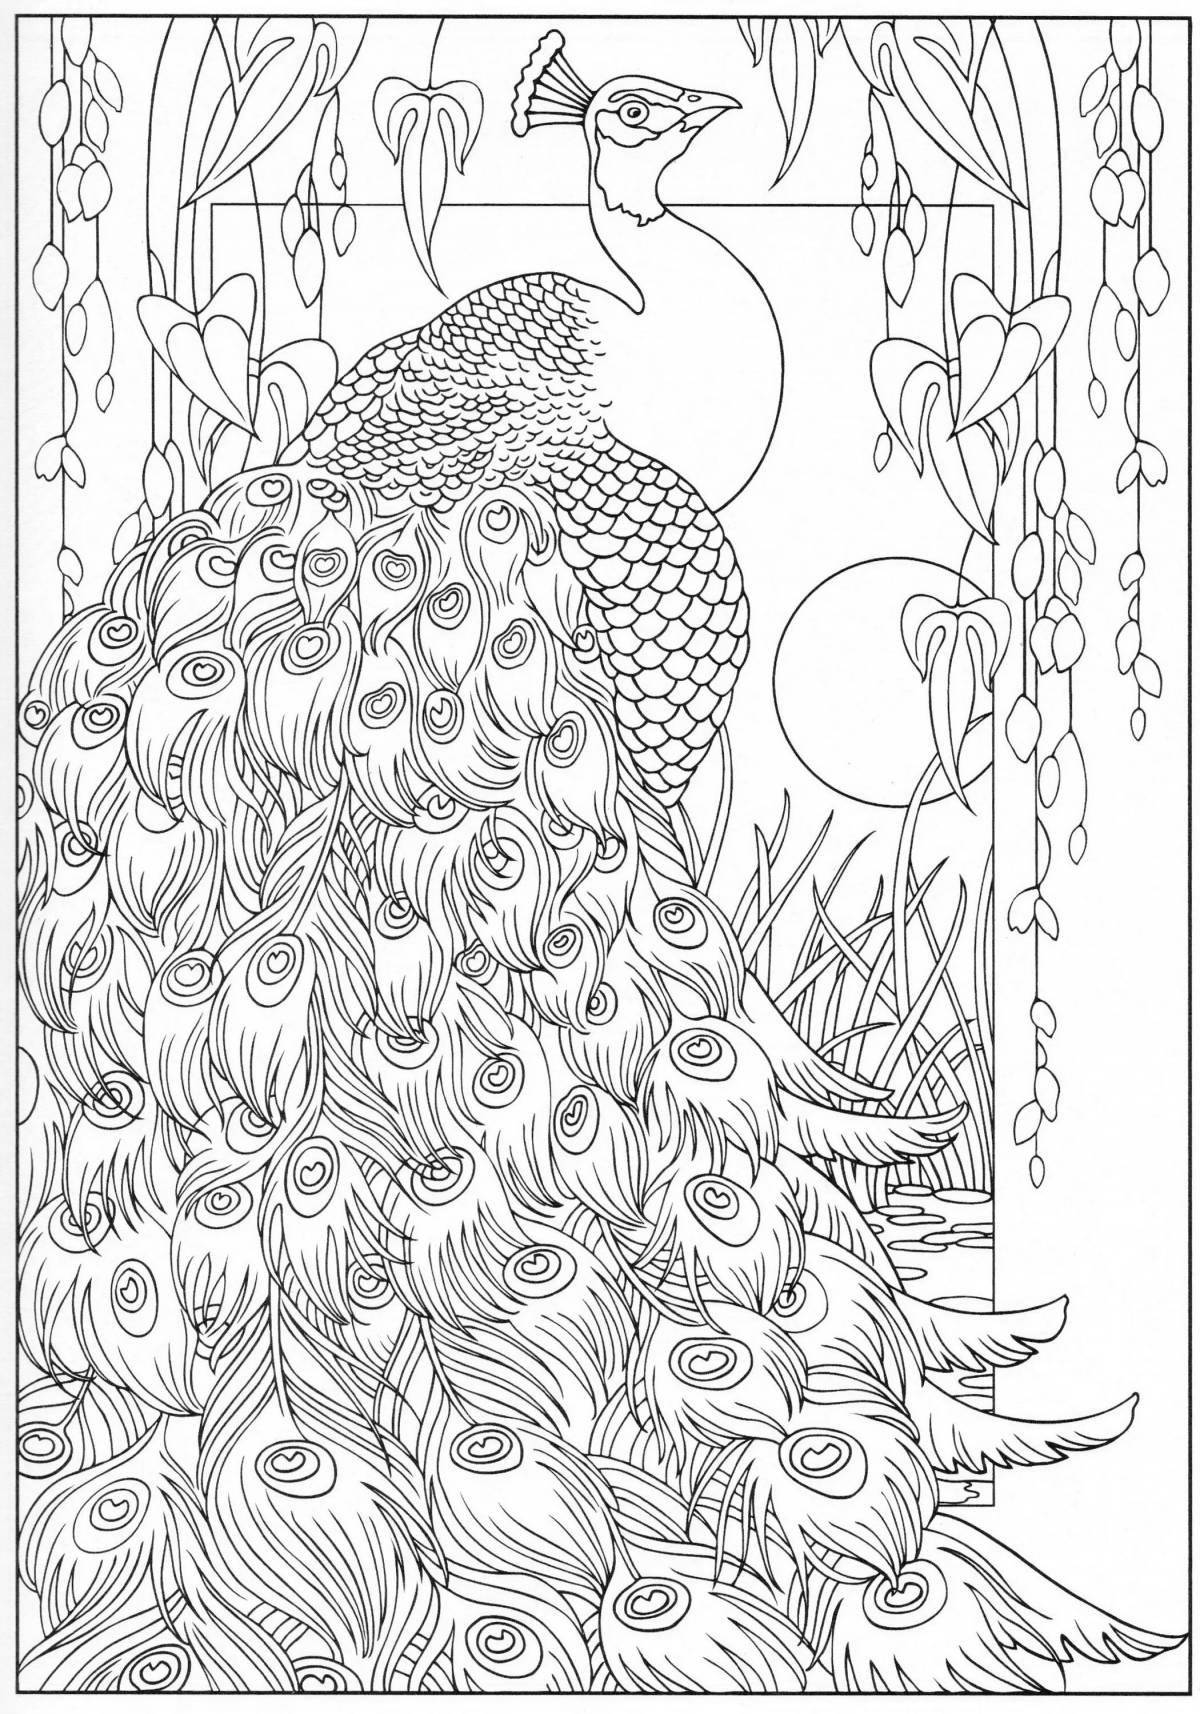 Peacock bright coloring by numbers